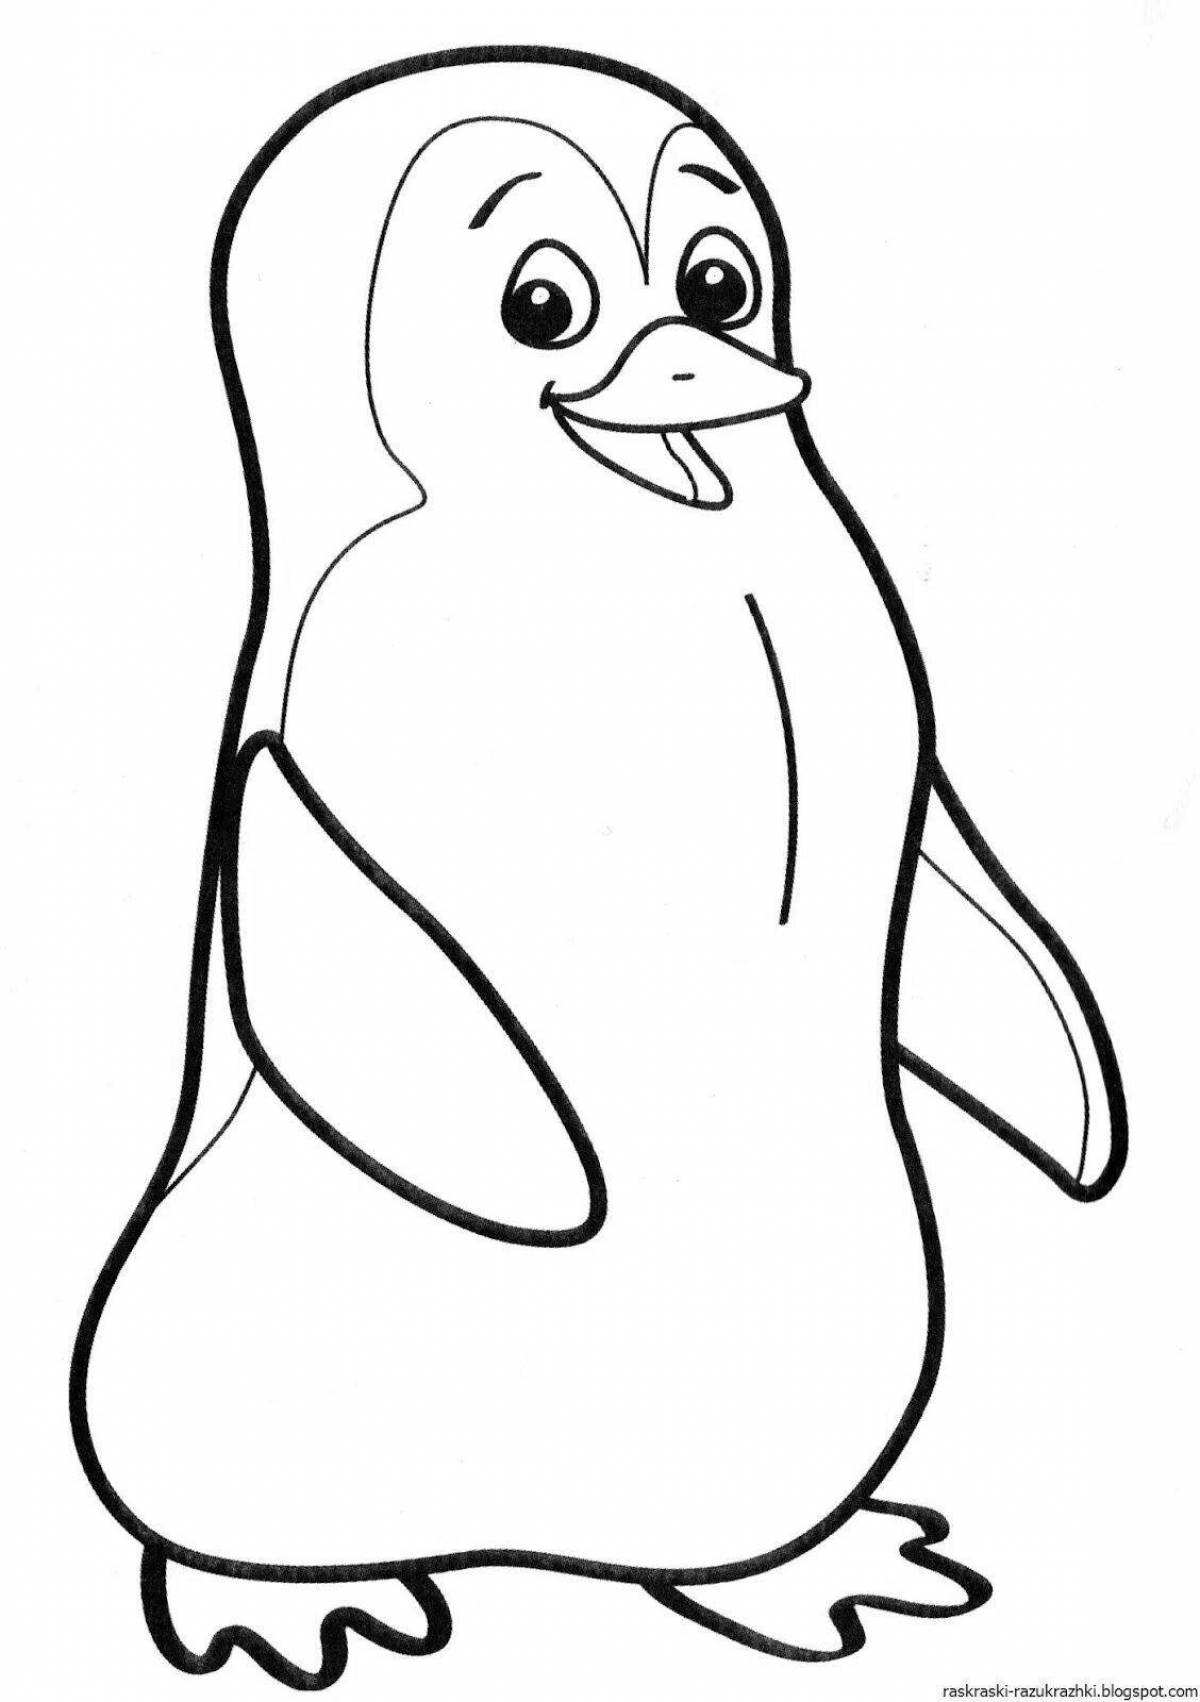 Awesome drawing of a penguin